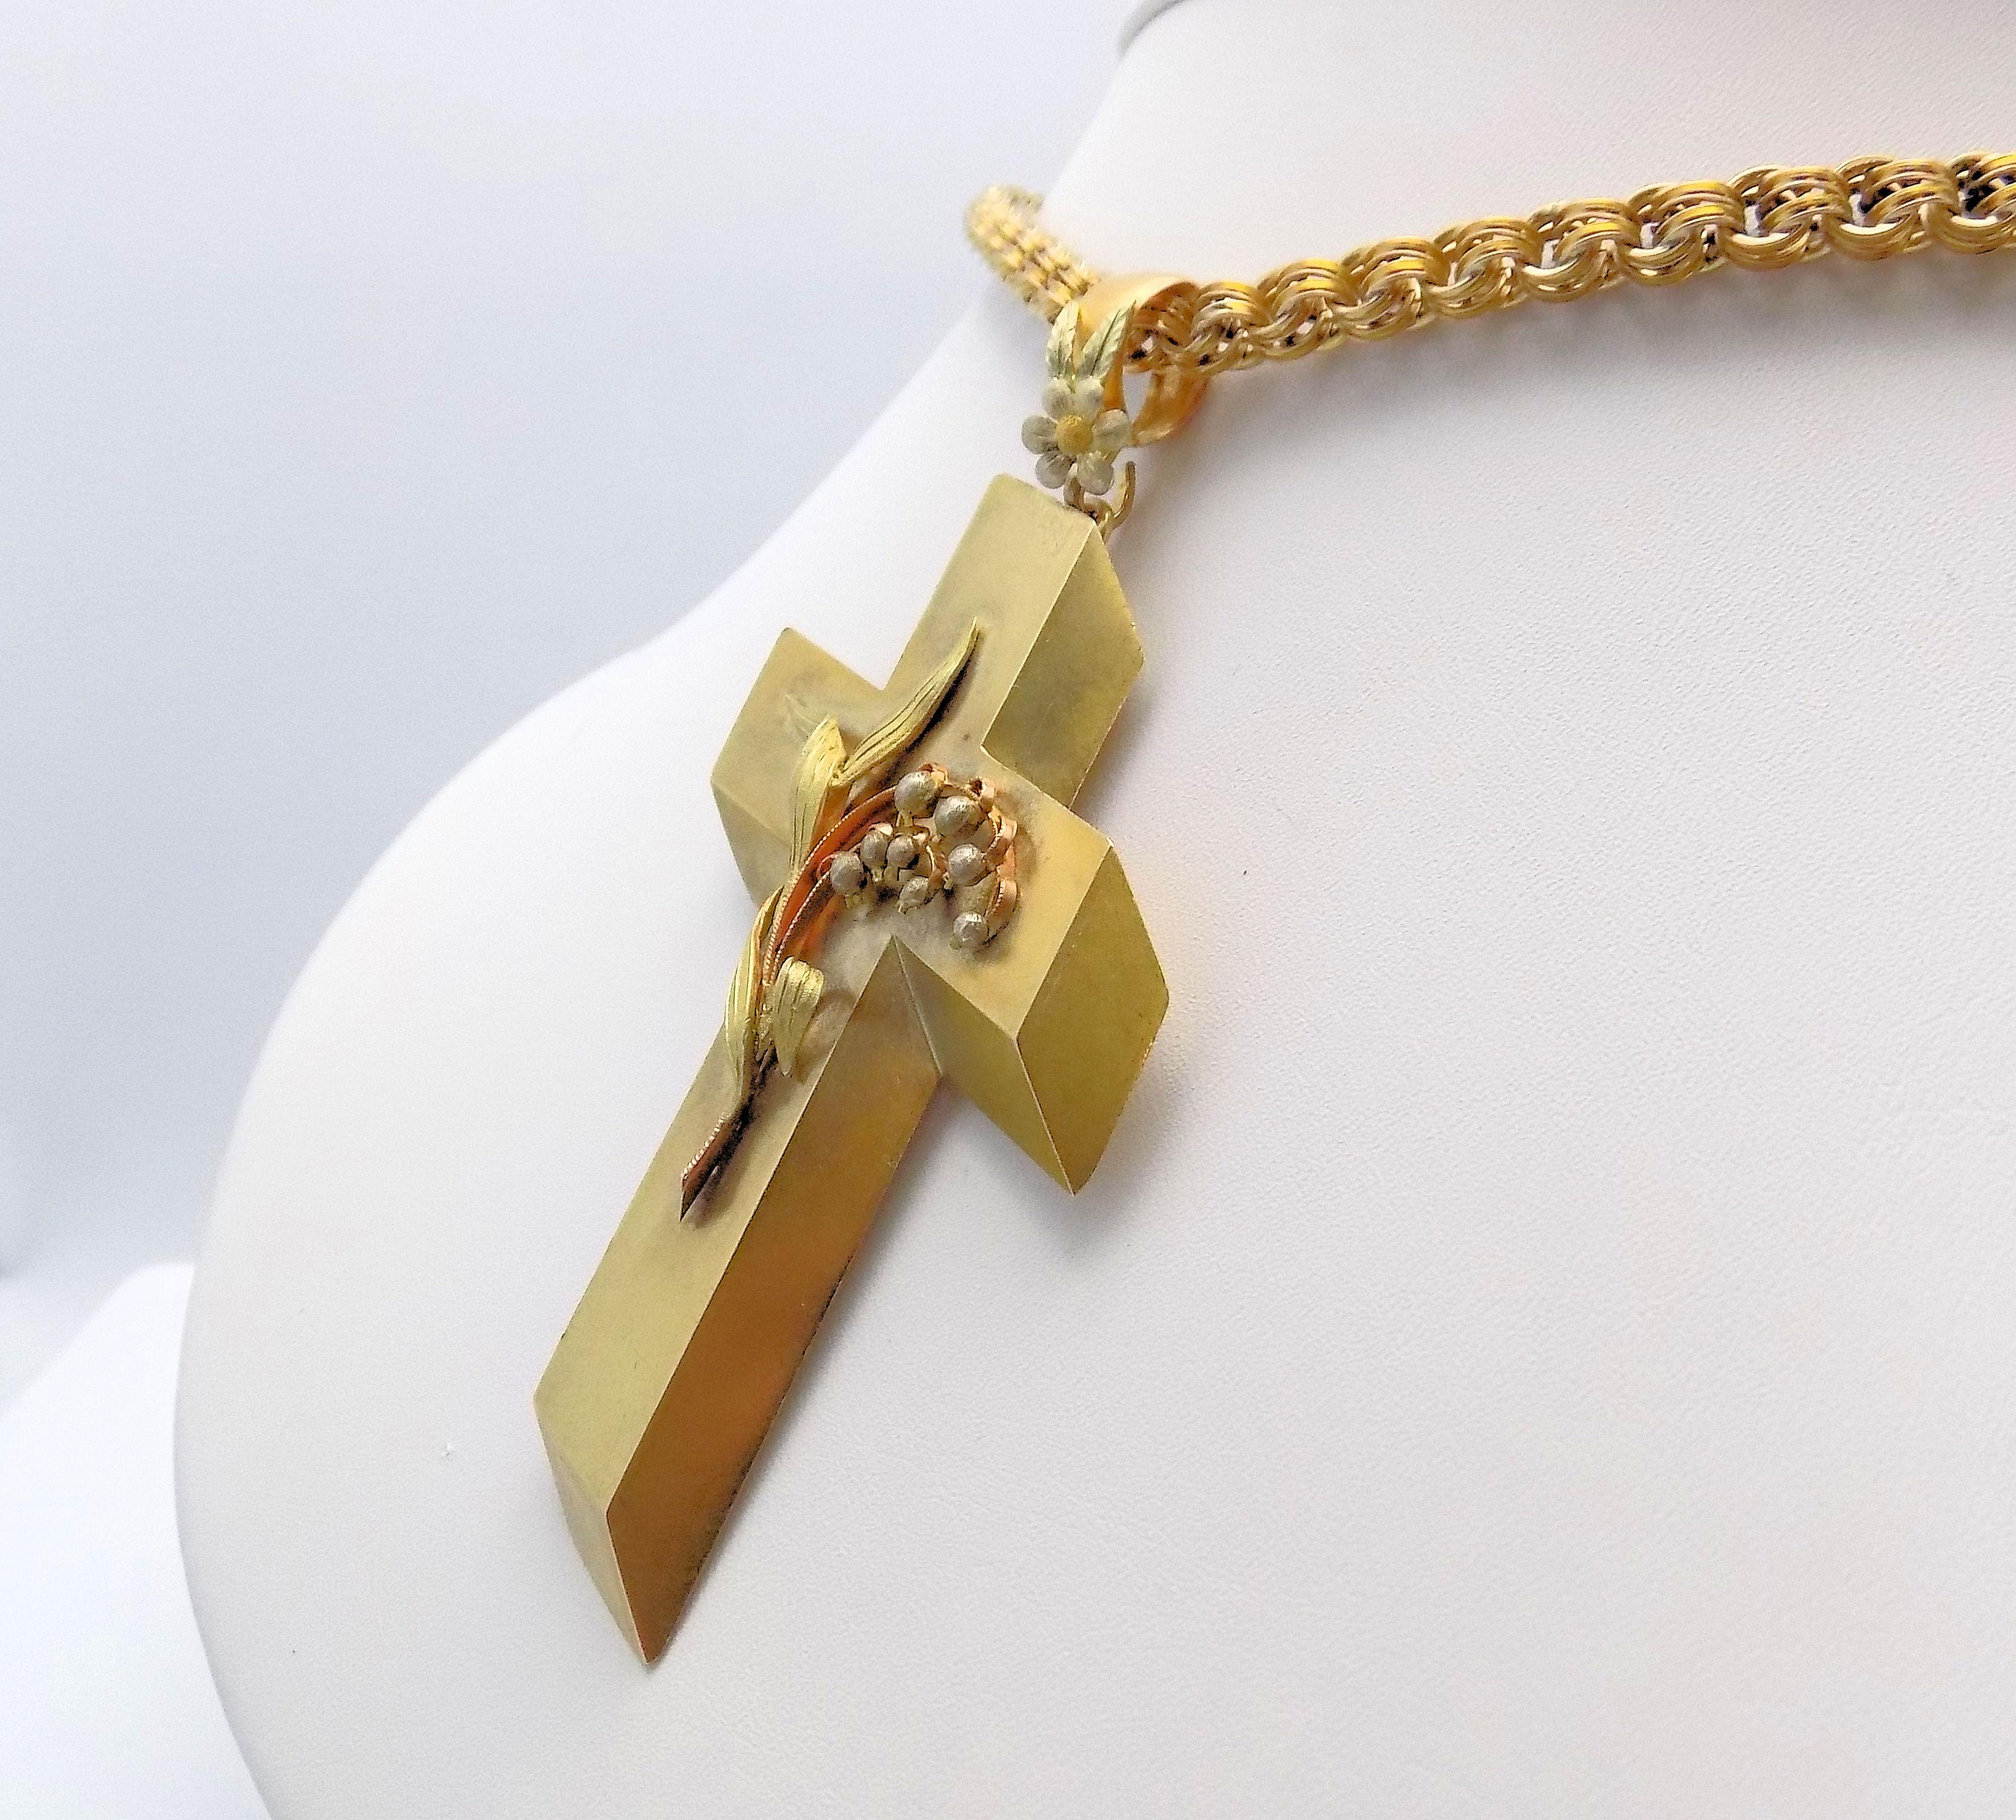 Awe-inspiring 14 Karat Yellow Gold Antique Cross Pendant & Chain.  Dramatic 3-D Effect on this Large Cross with Applied Lilly of the Valley Floral Motif, Excellent Condition; Chain Is Curved Link, Handmade, Several Repairs on Chain (Good Condition).